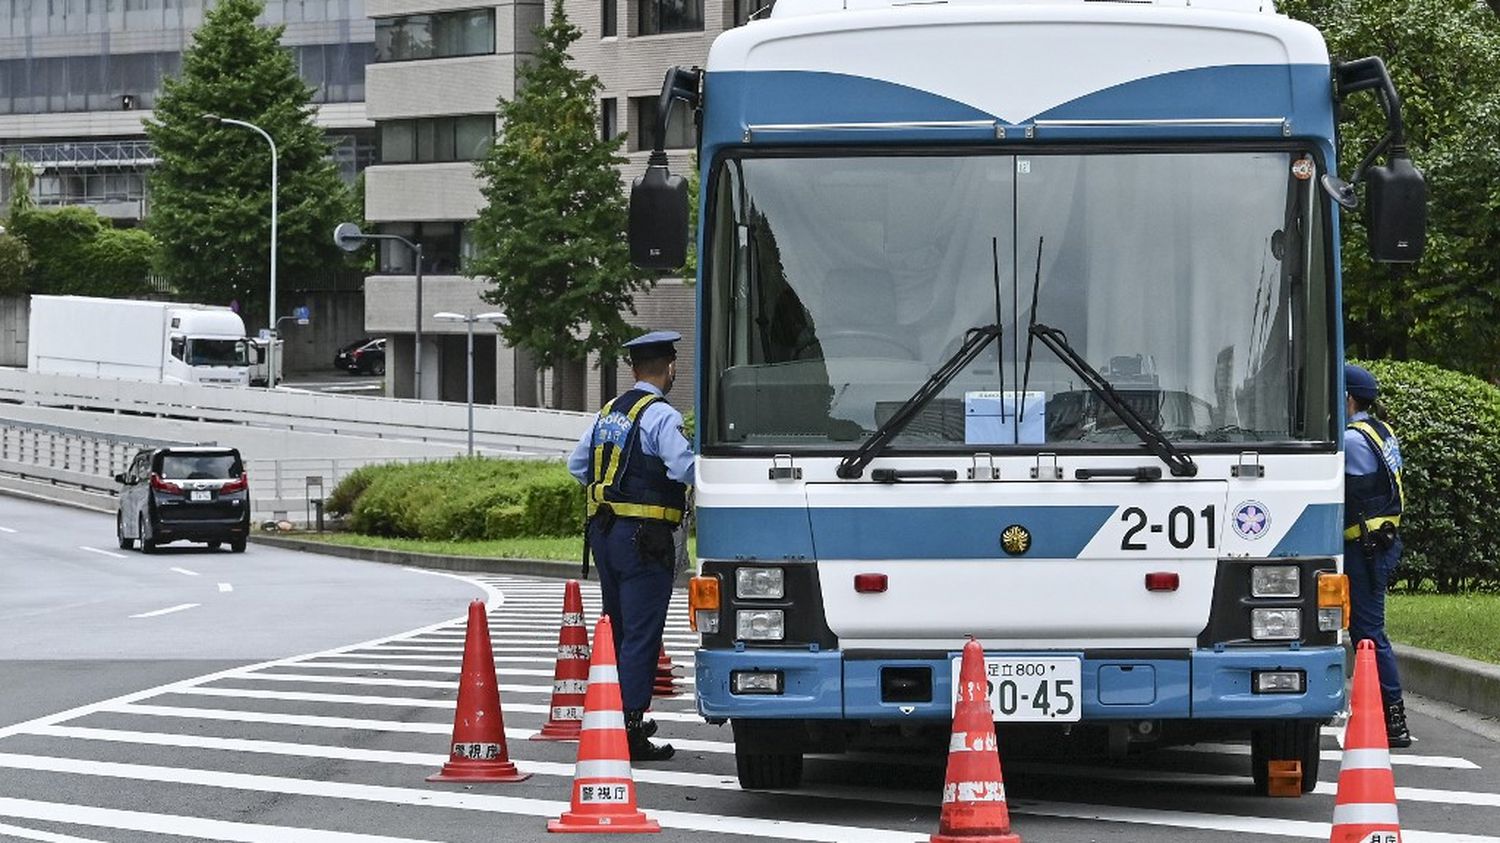 Japan: a man tried to set himself on fire near the residence of the Prime Minister
